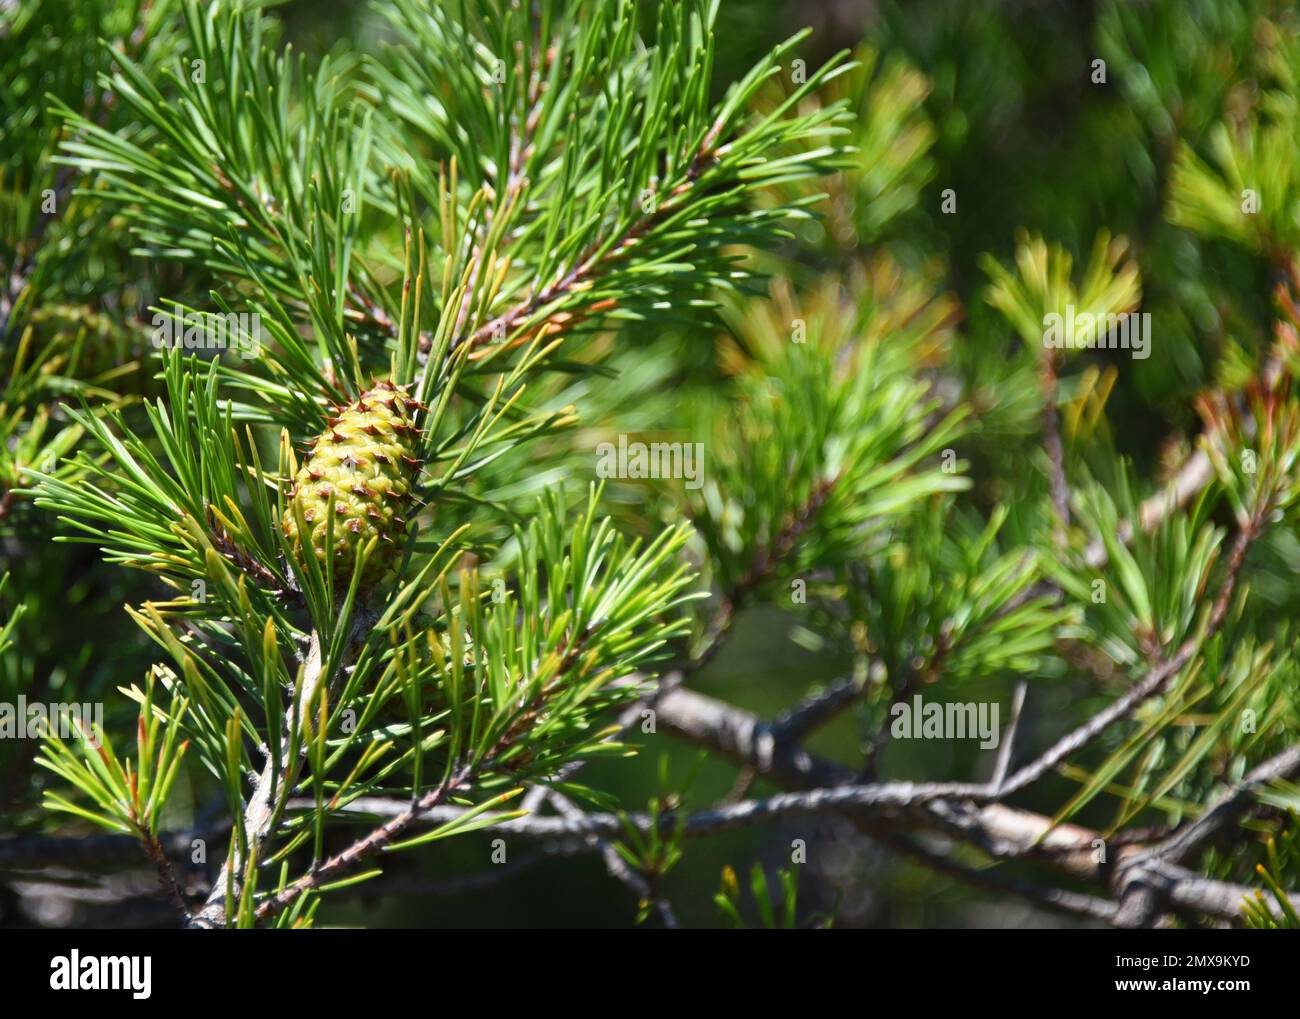 Fir Tree Branch Small Cones Hi-res Stock Photography And, 50% OFF